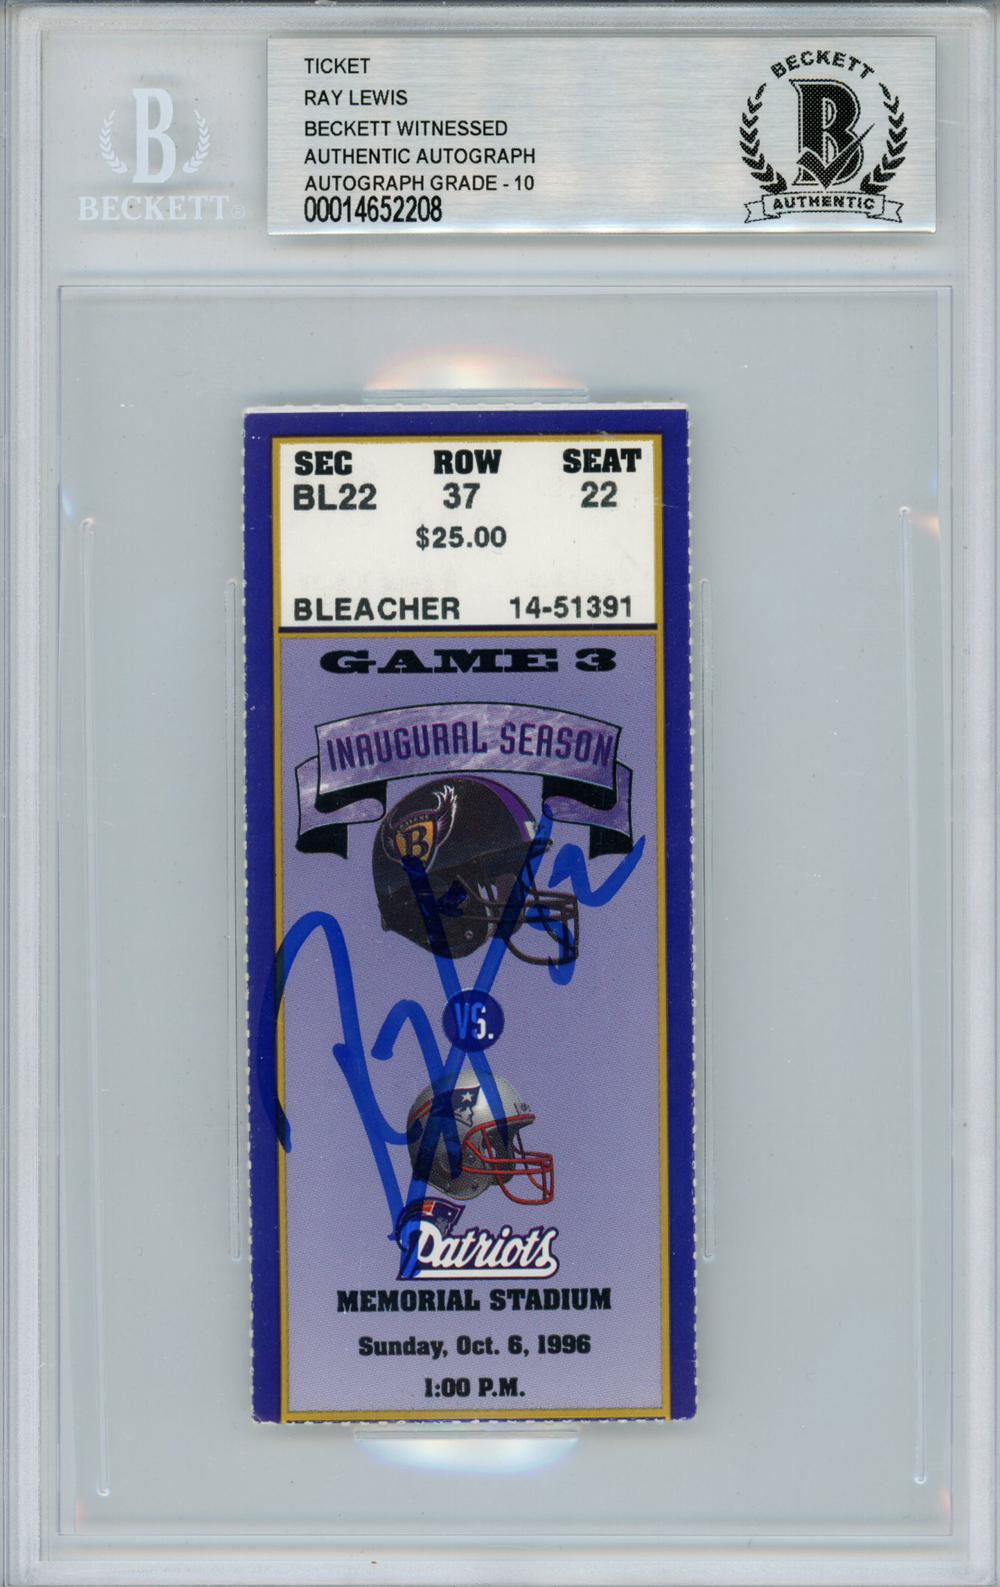 Ray Lewis Autographed/Signed 10/6/1996 vs Patriots Ticket Beckett Slab